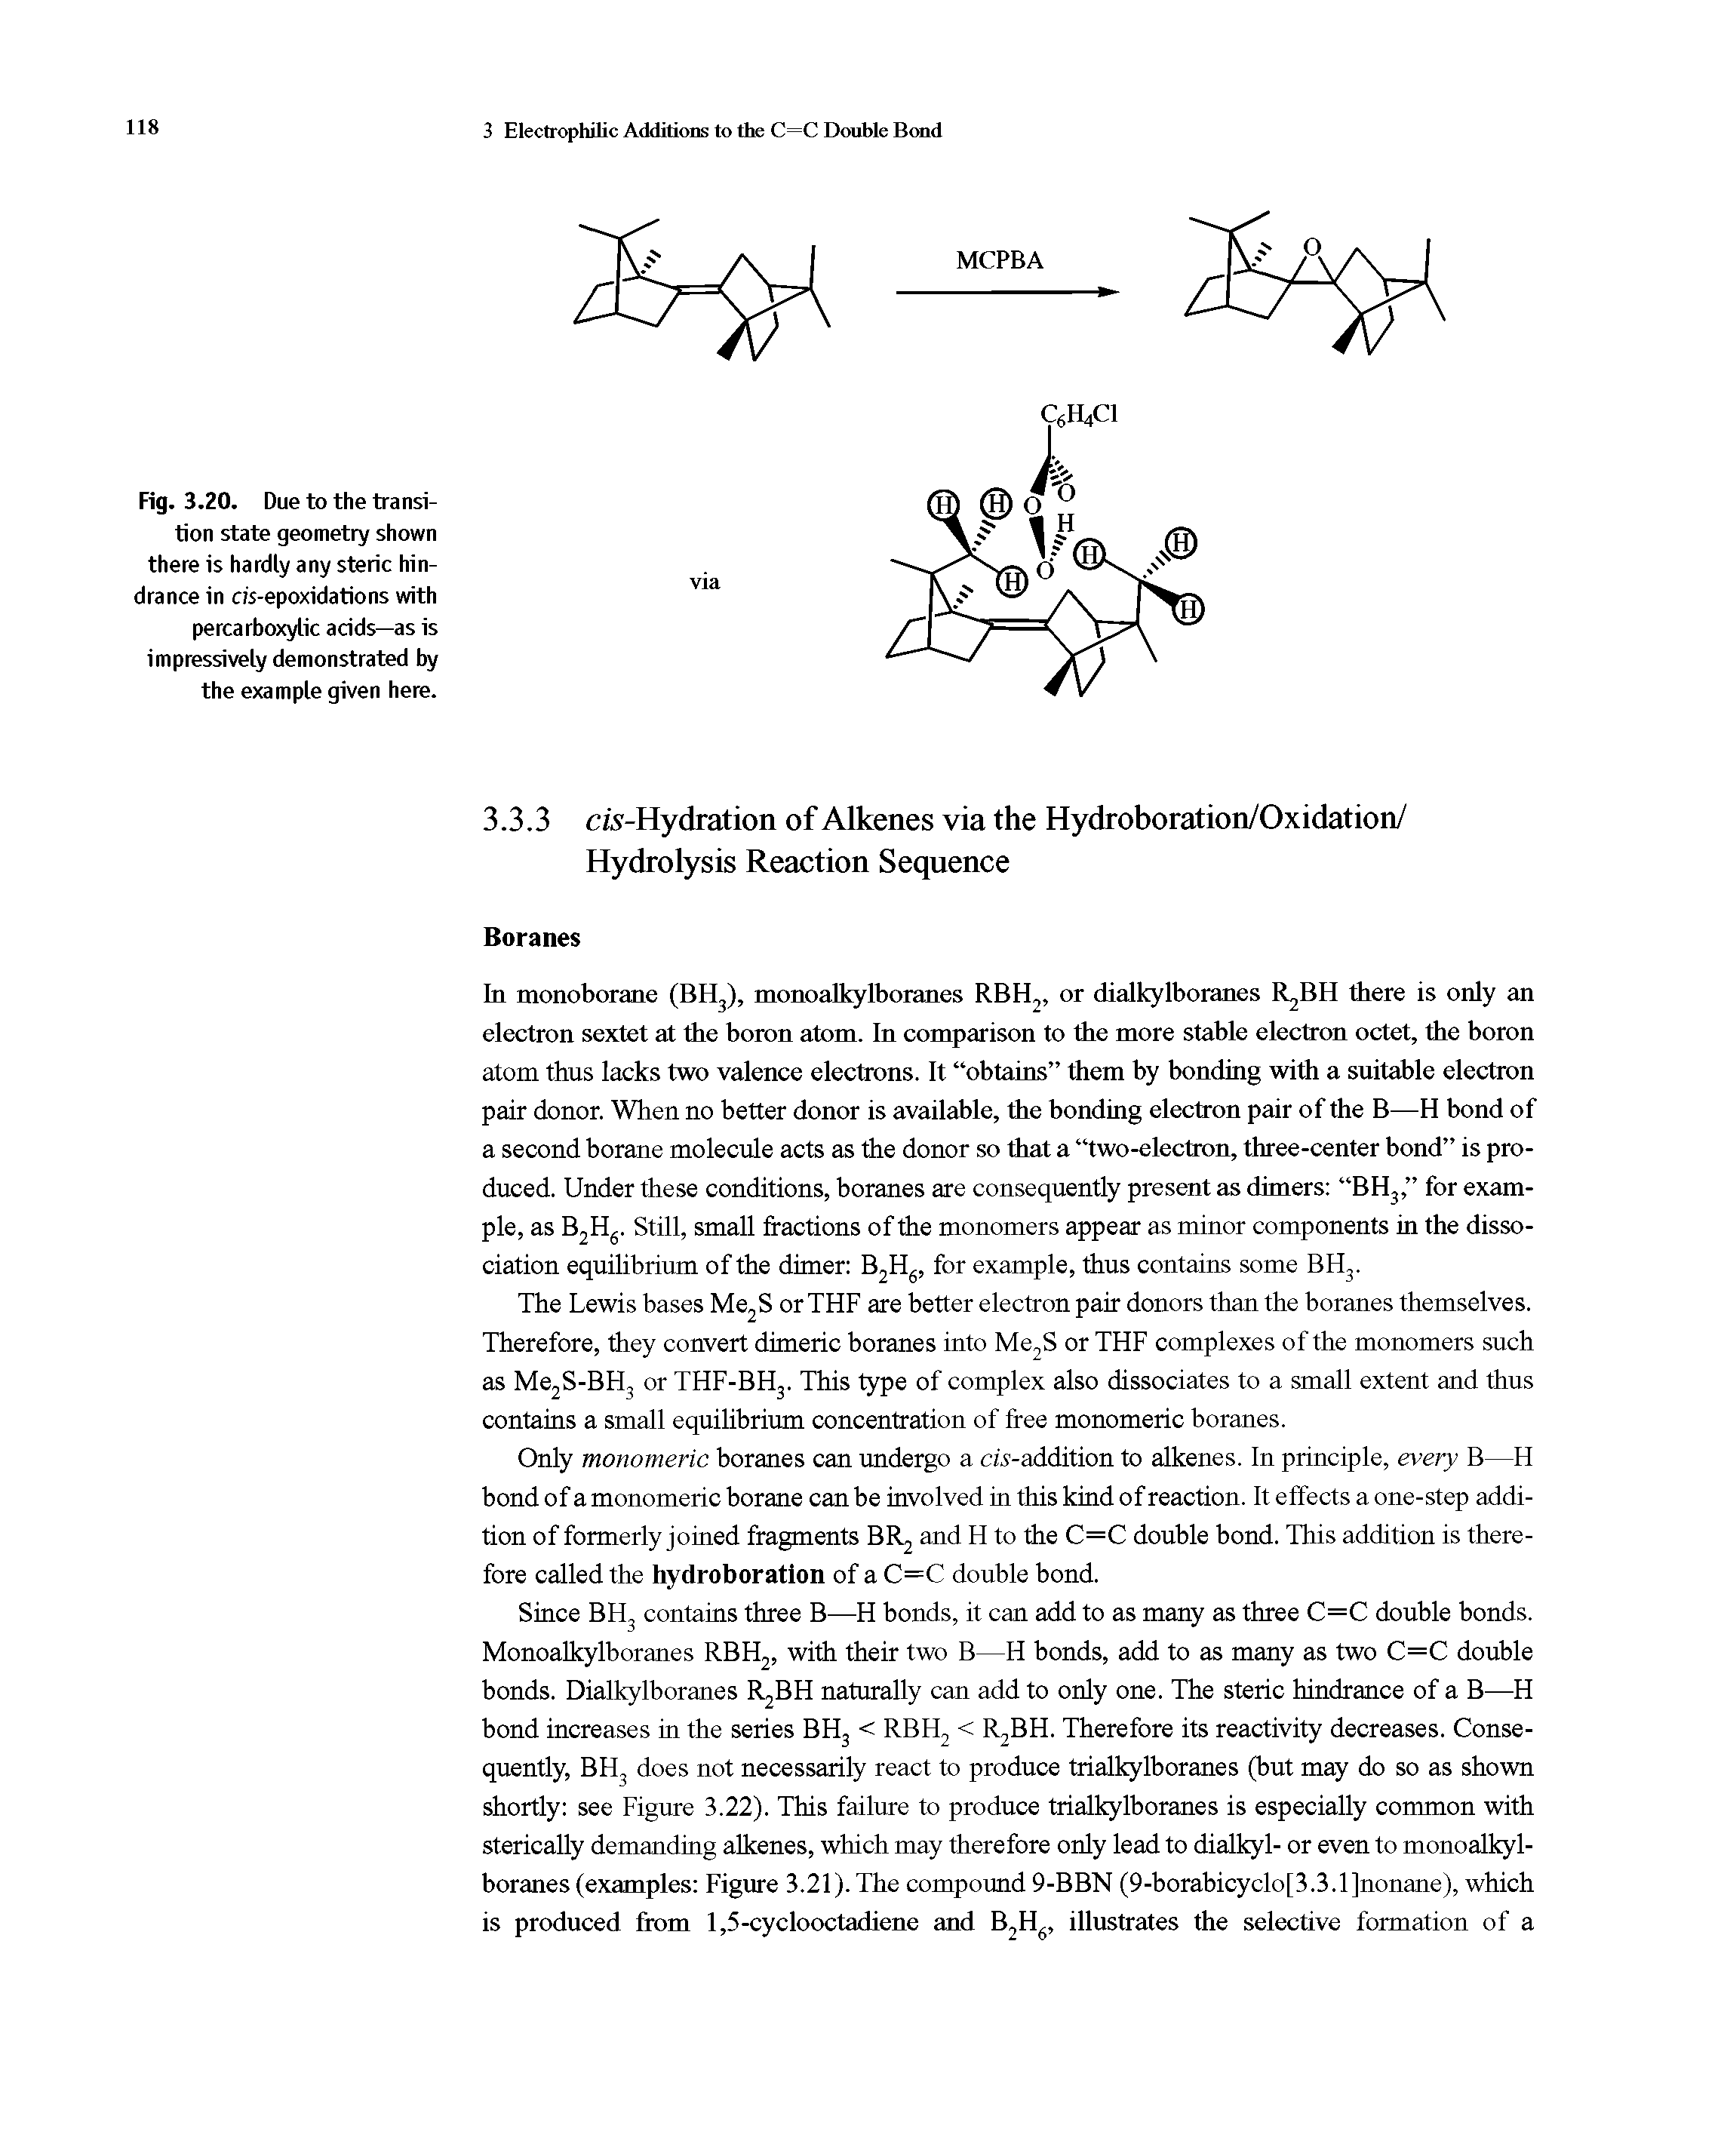 Fig. 3.20. Due to the transition state geometry shown there is hardly any steric hindrance in cis-epoxidations with percarboxylic acids—as is impressively demonstrated by the example given here.